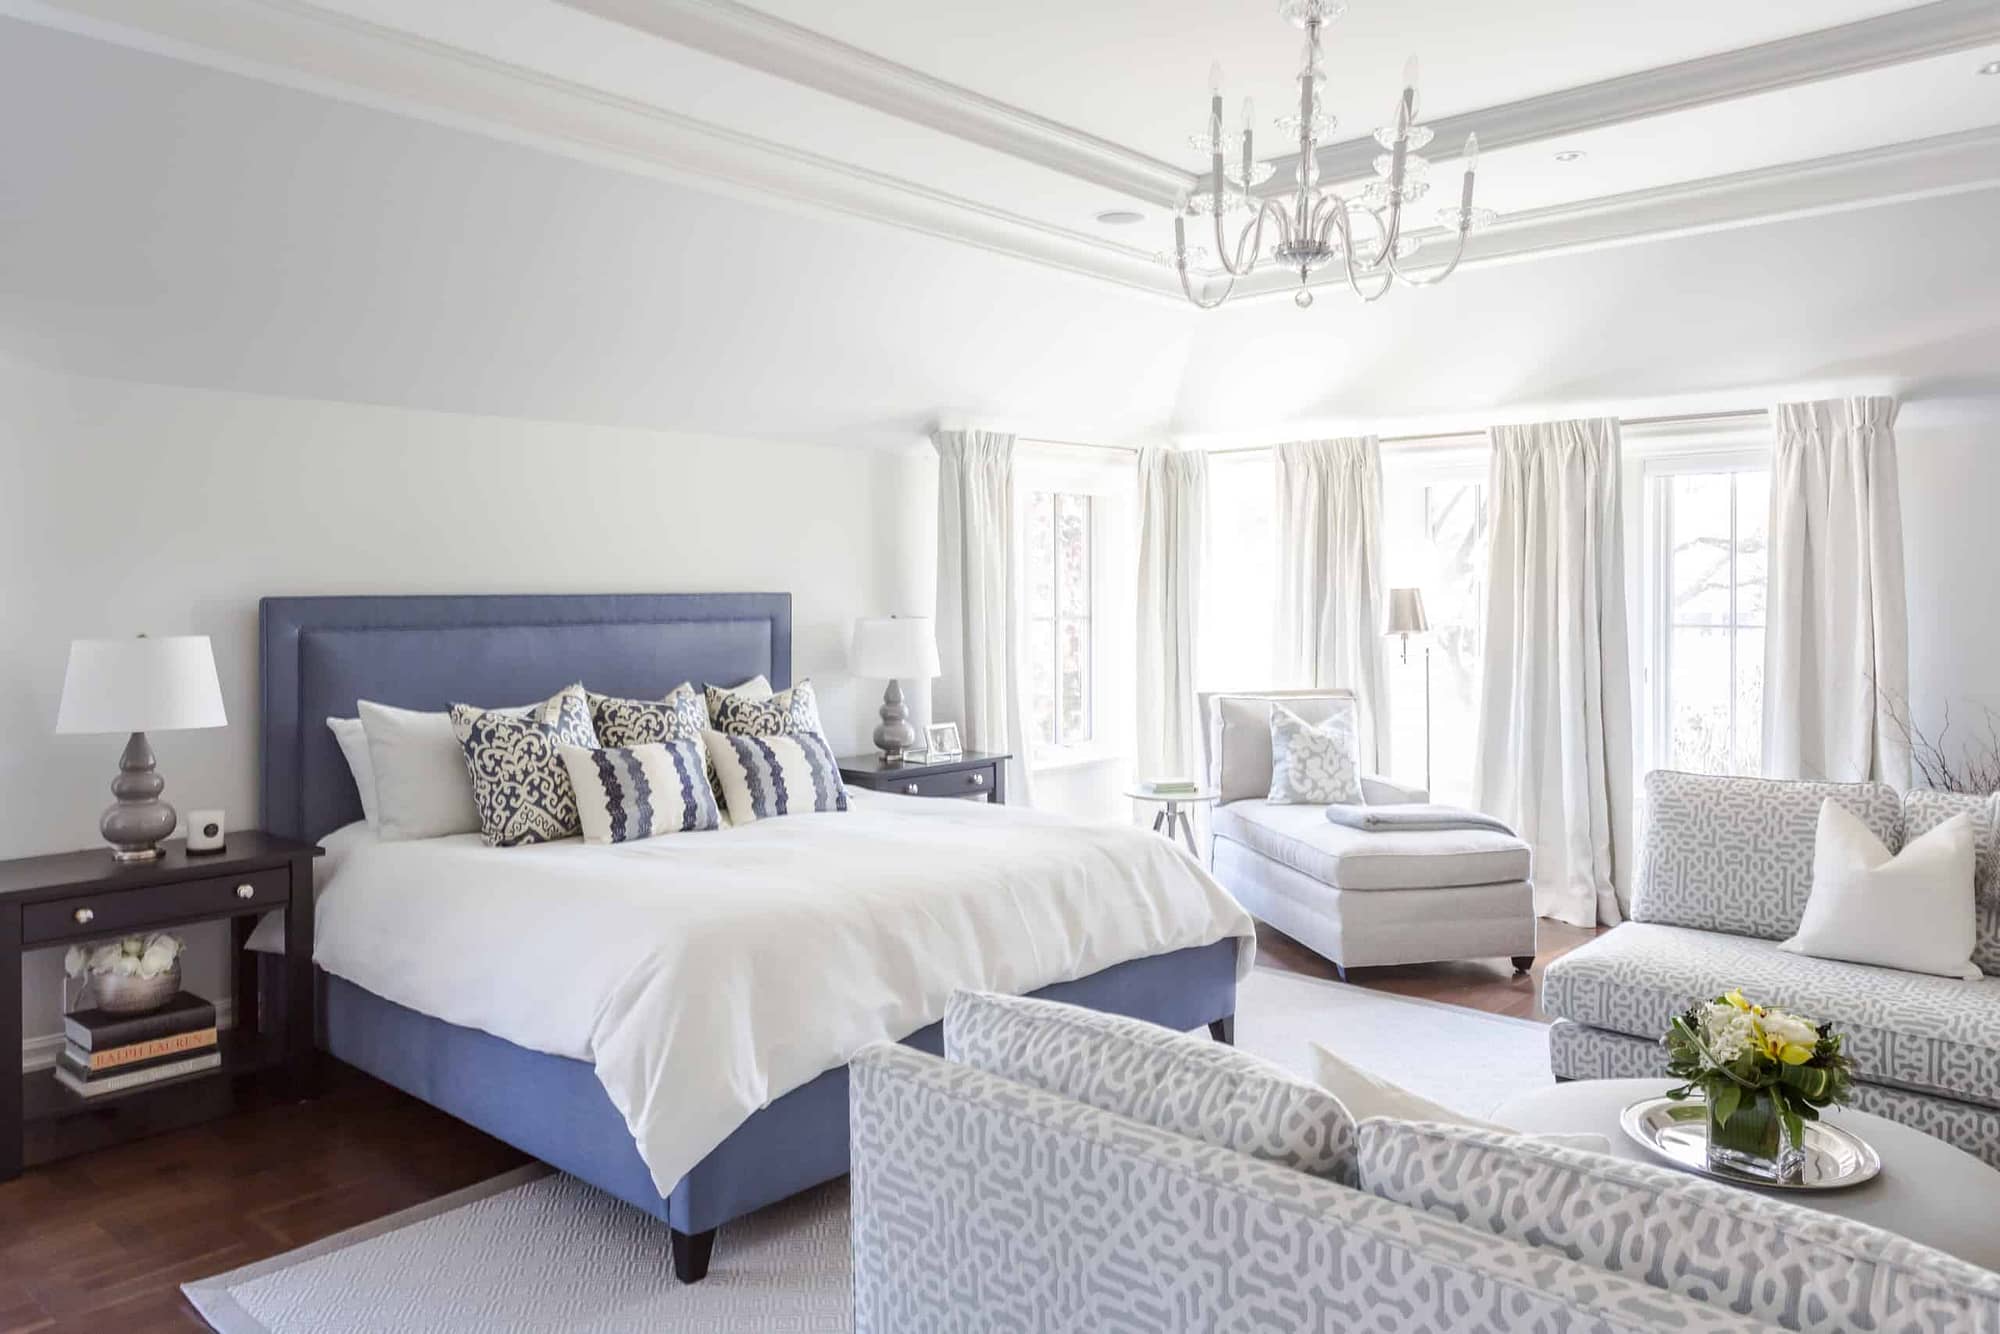 Large blue bed with a white blanket on it inside the master bedroom